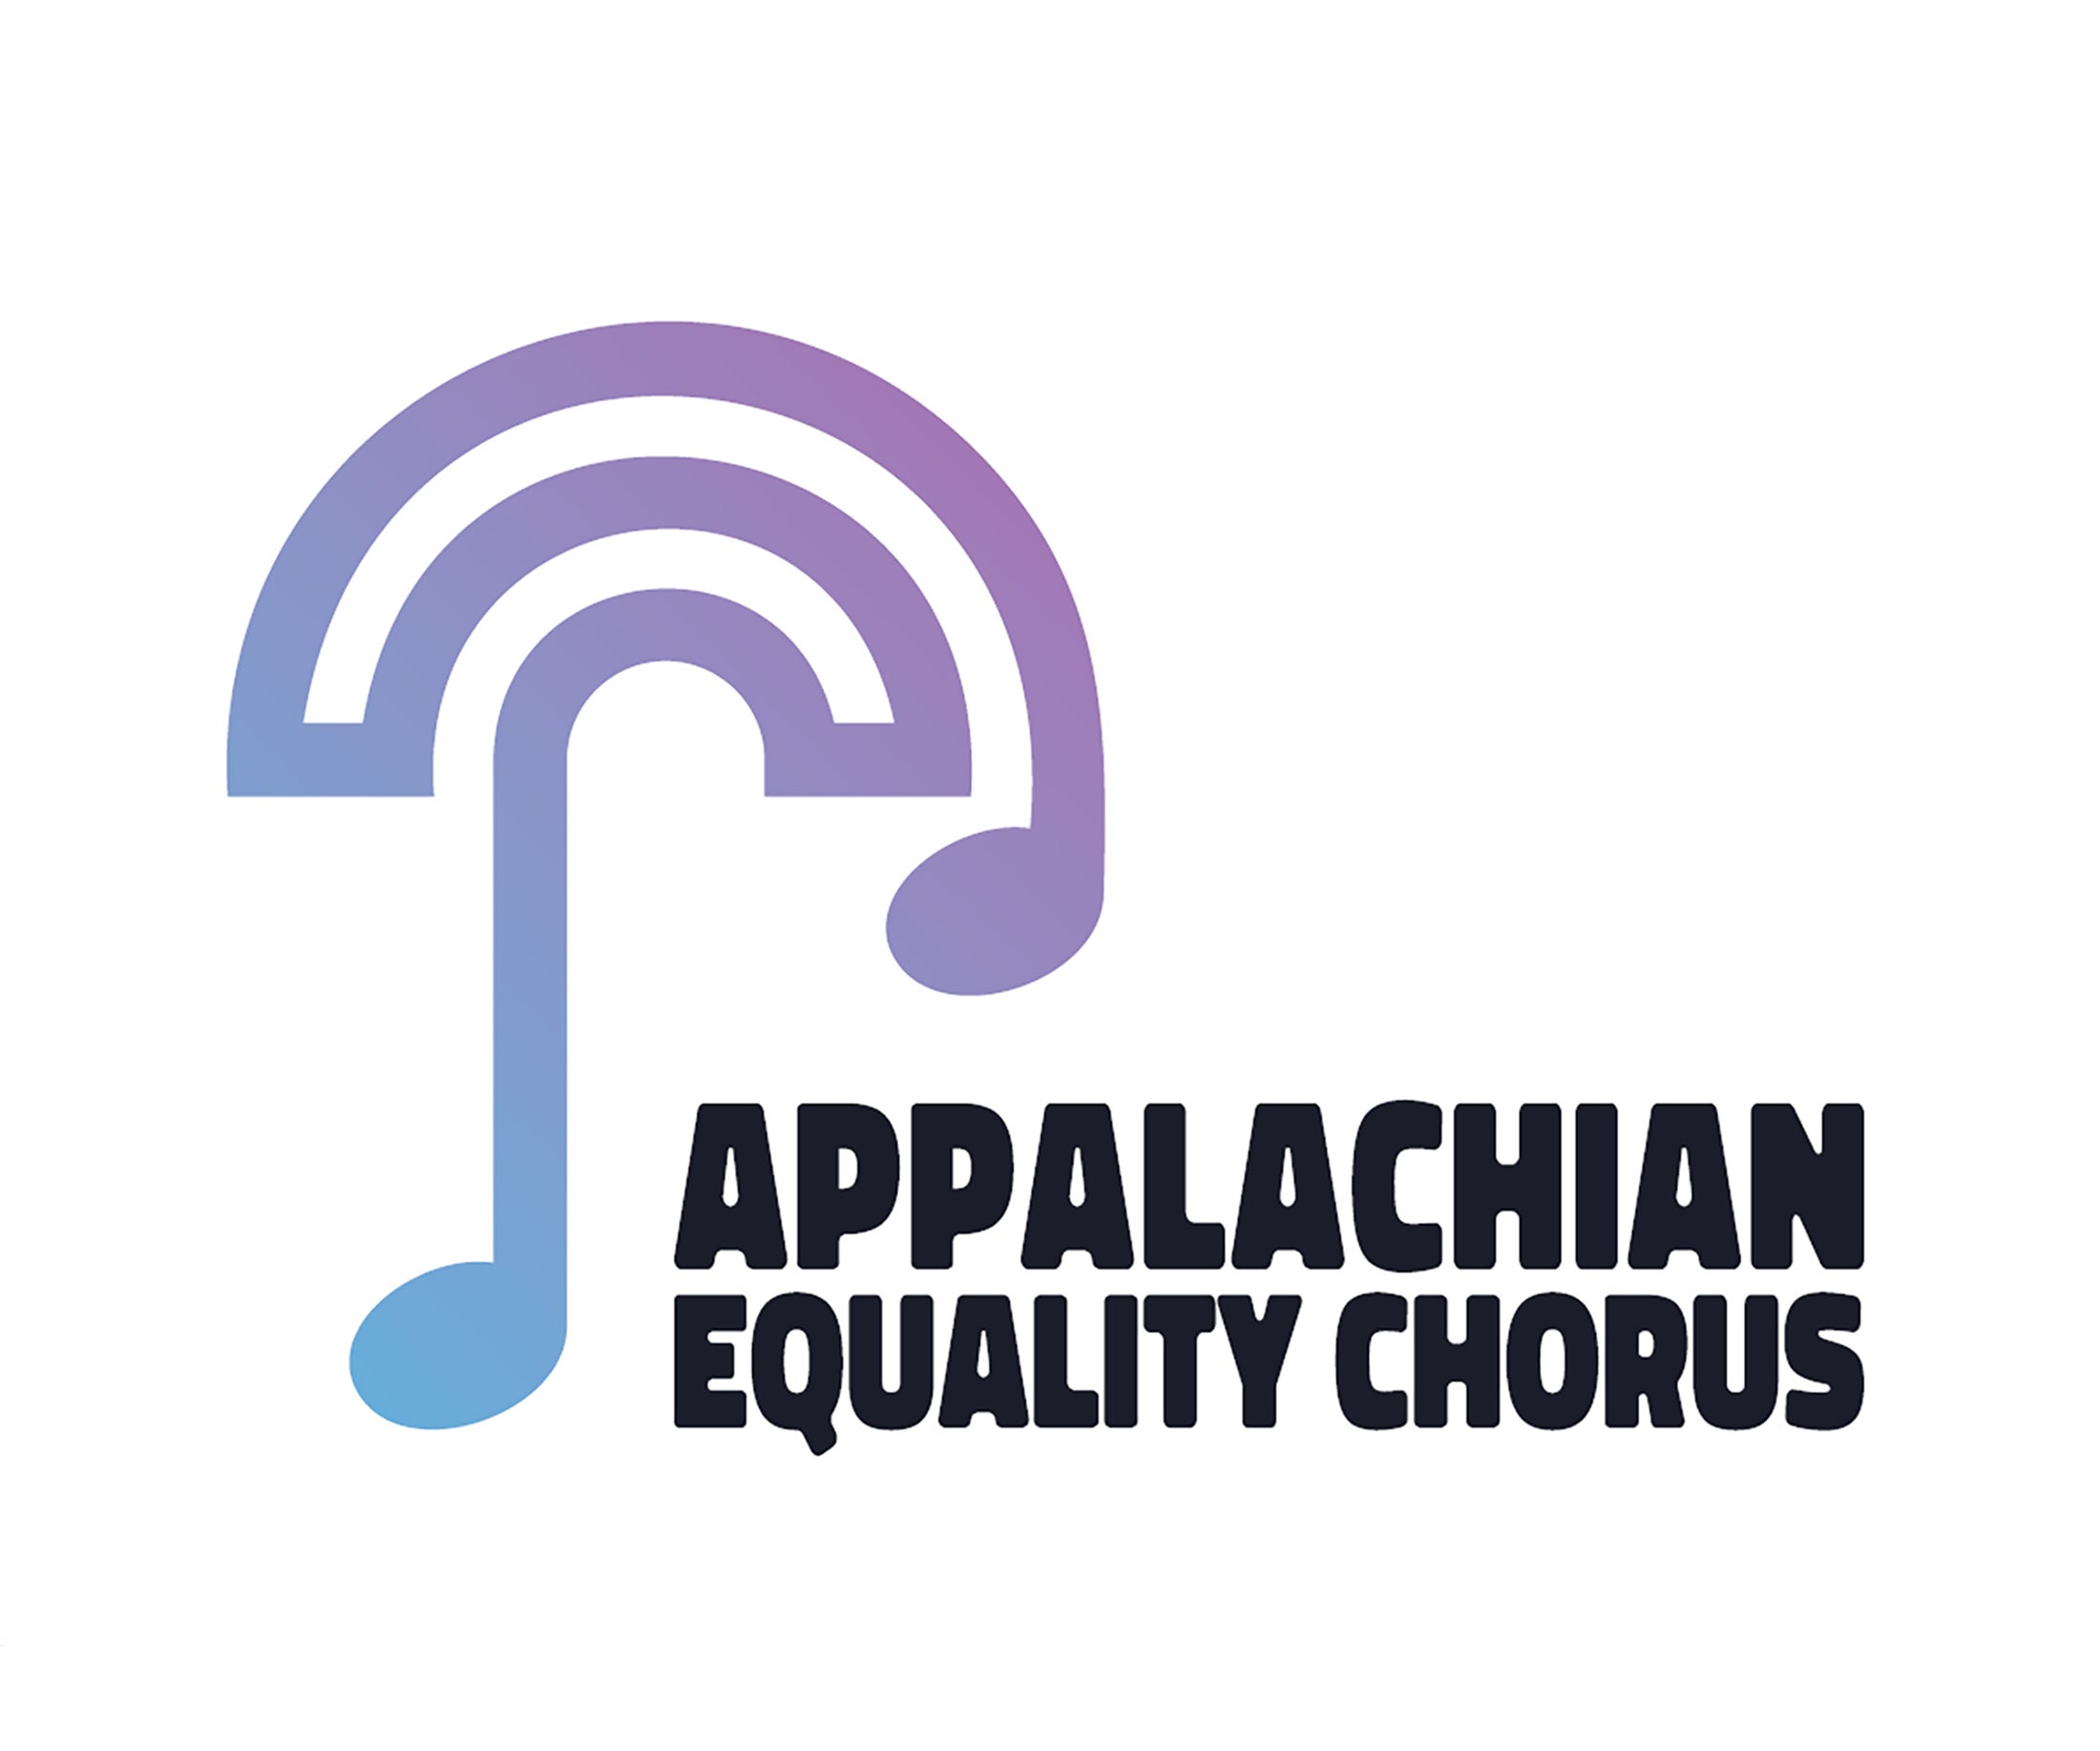 Appalachian Equality Chorus Presents "The Rainbow Runs Over Me" presales in Knoxville